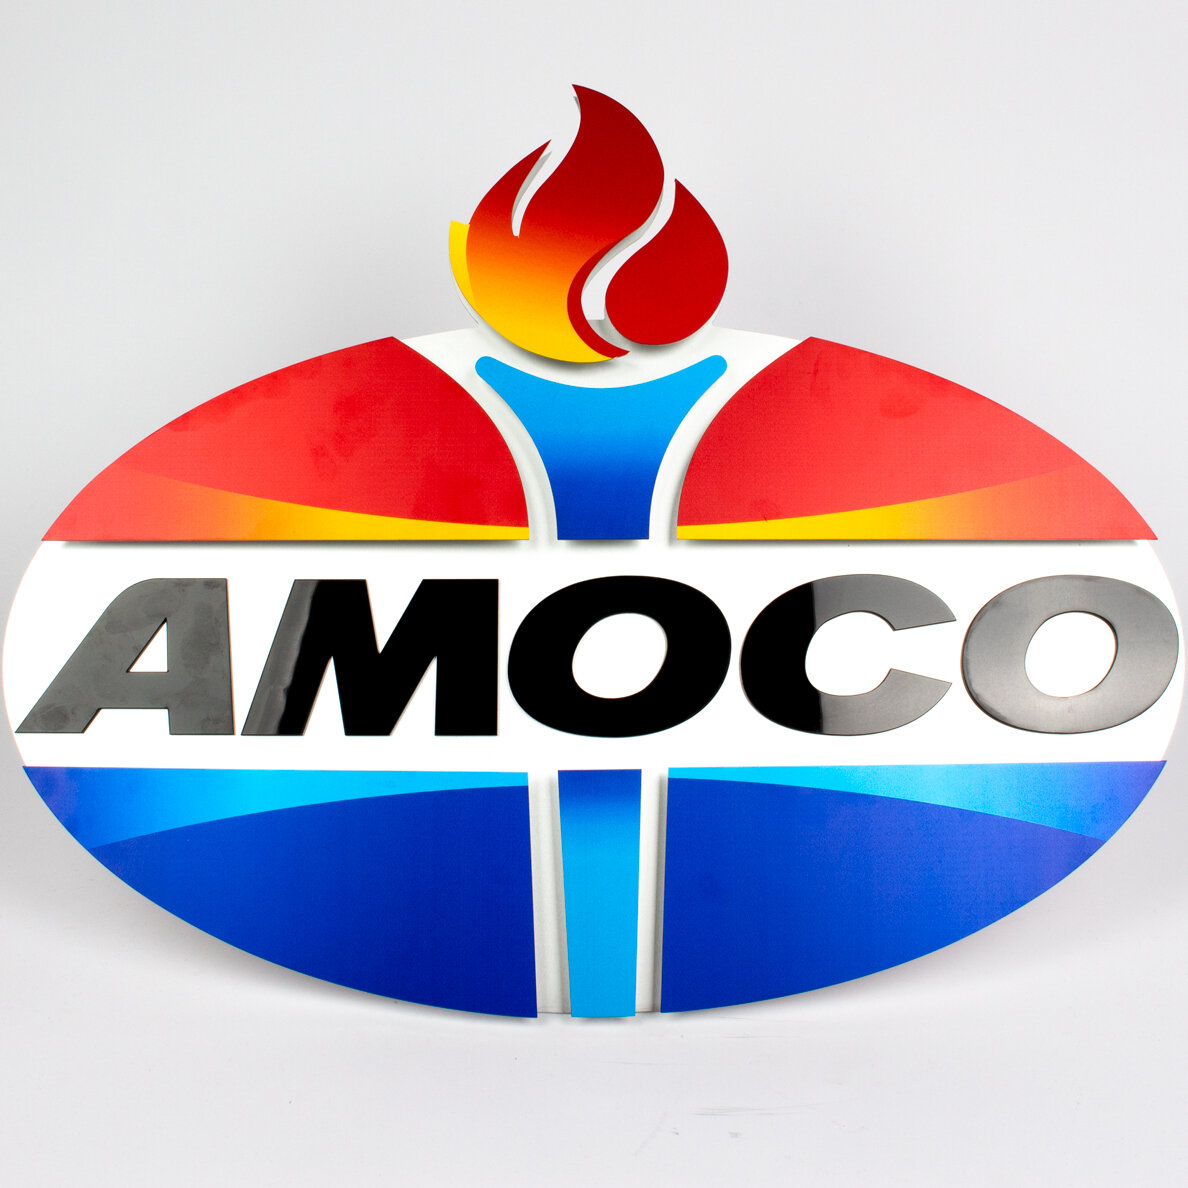 Amoco-Corporation-global-chemical-and-oil-company-plaque-sign-3